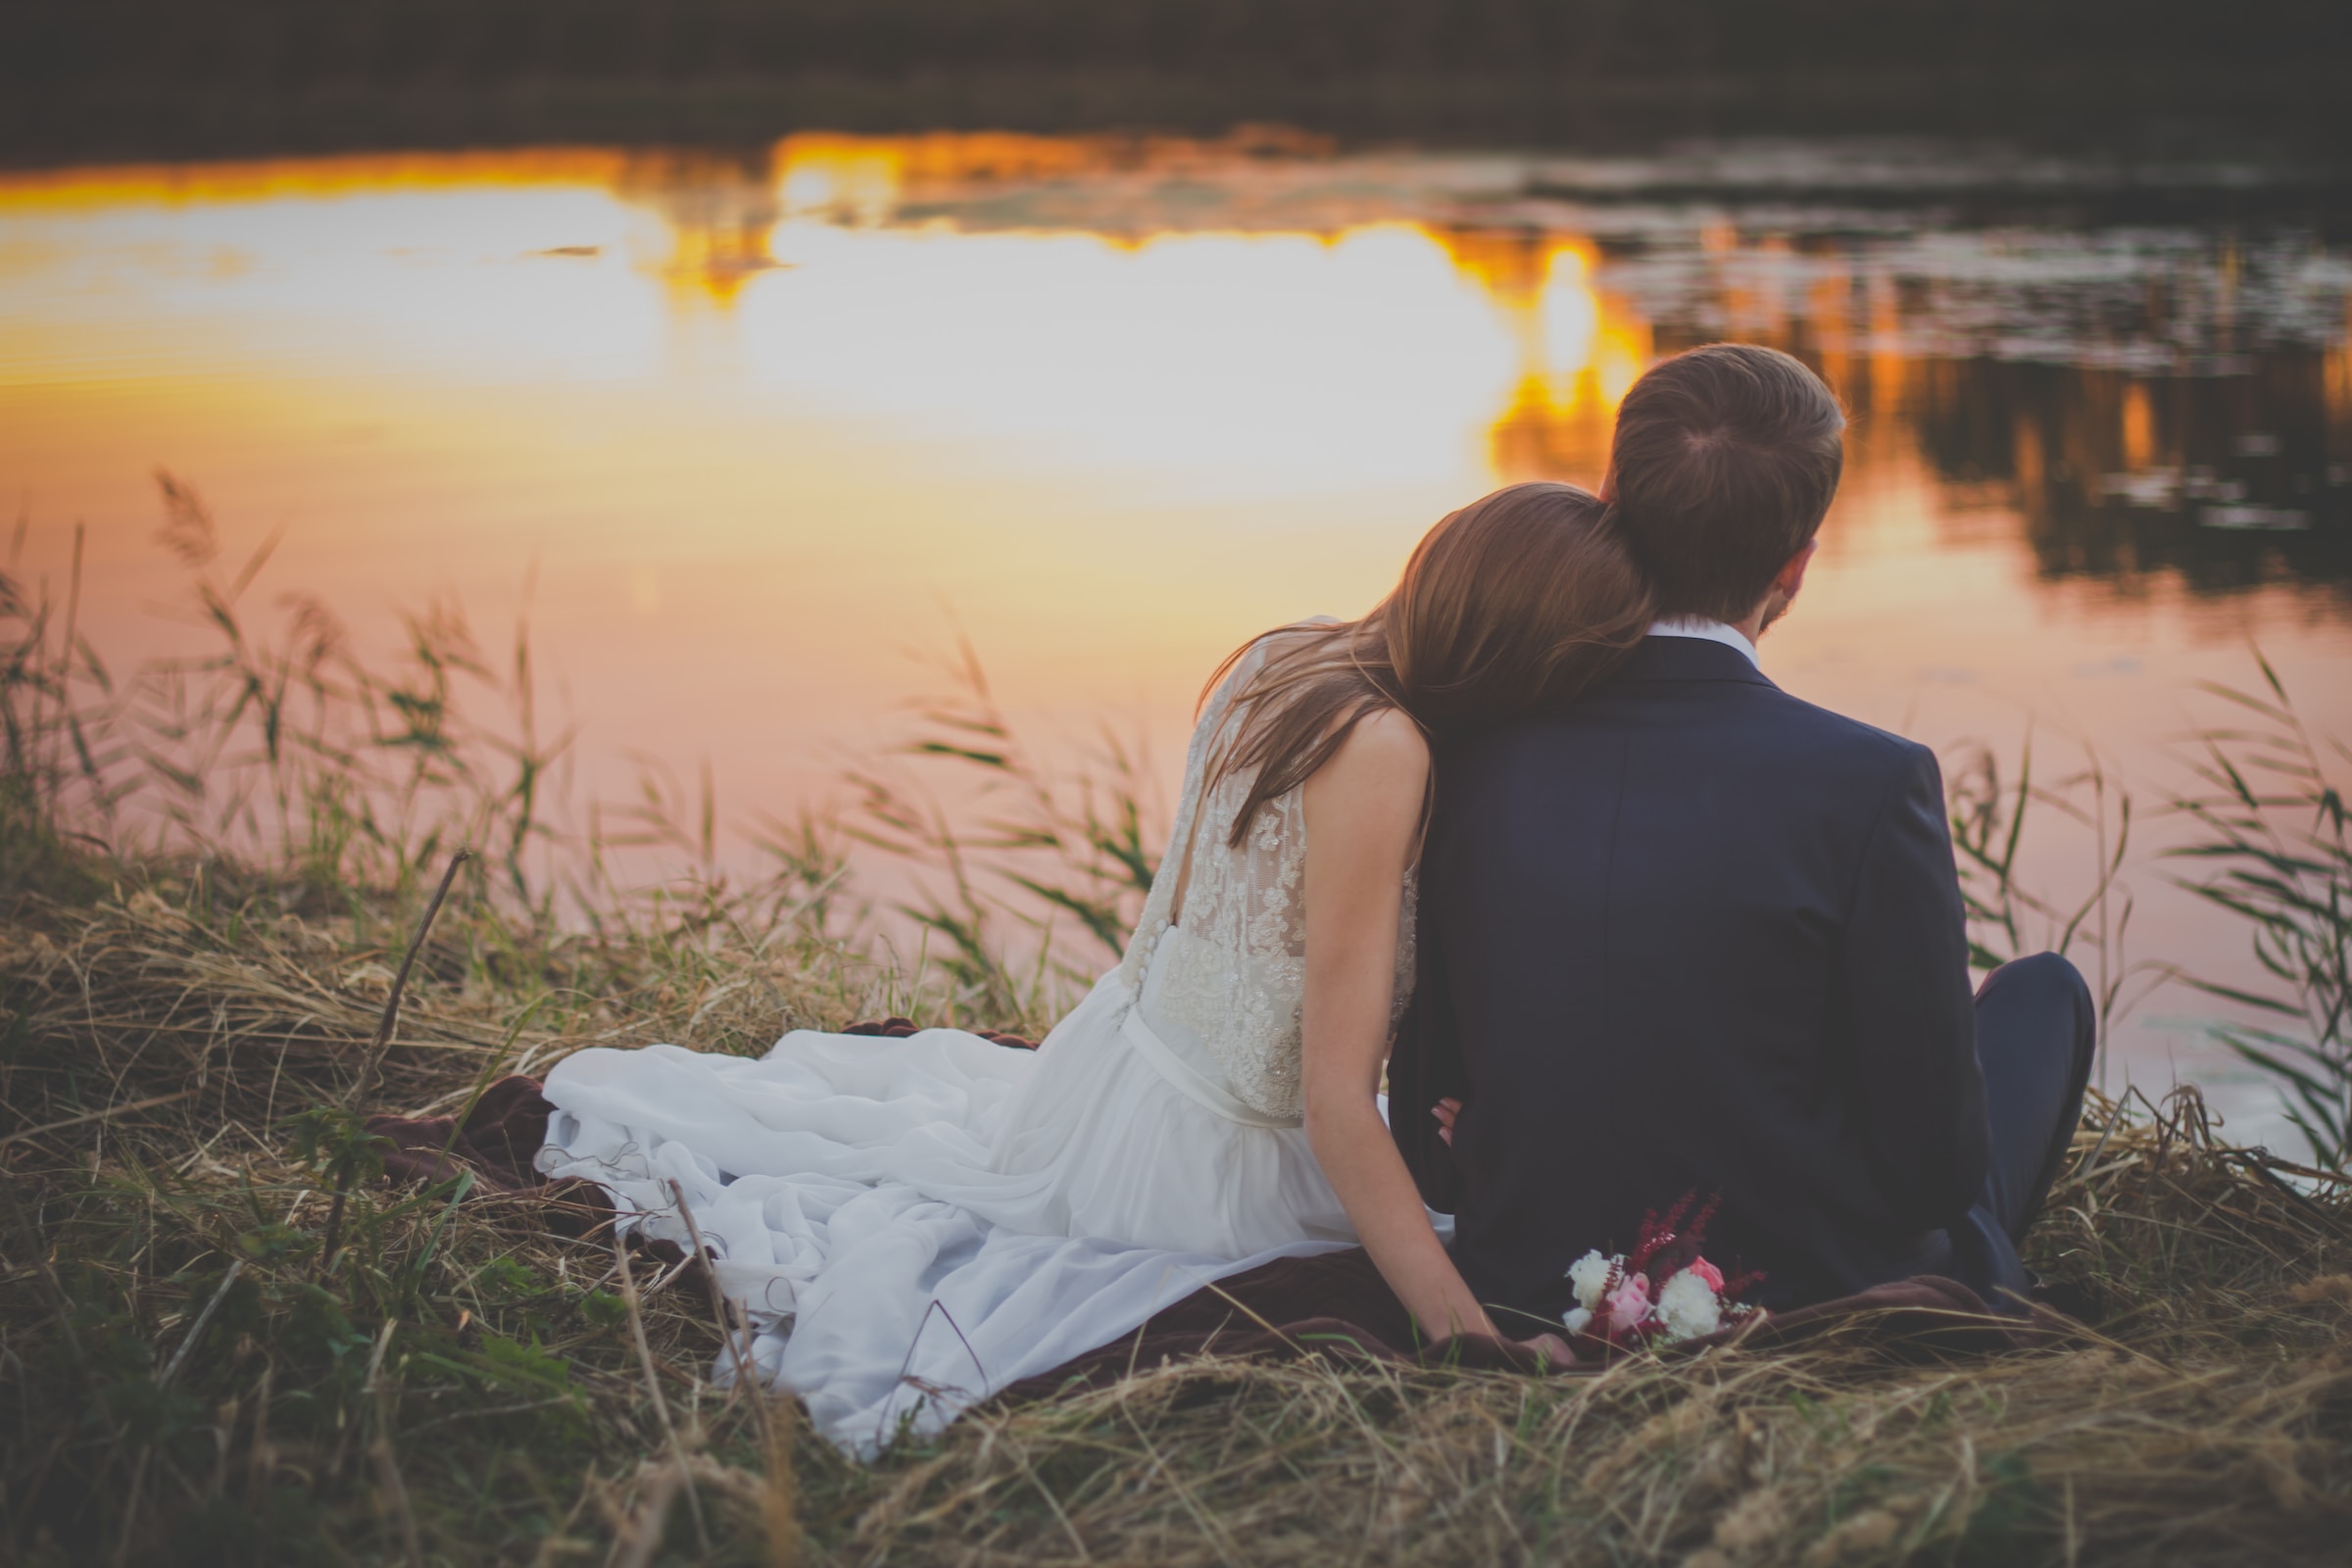 A woman leans on her husband's shoulder for support as they both sit by the water during golden hour | Source: Unsplash